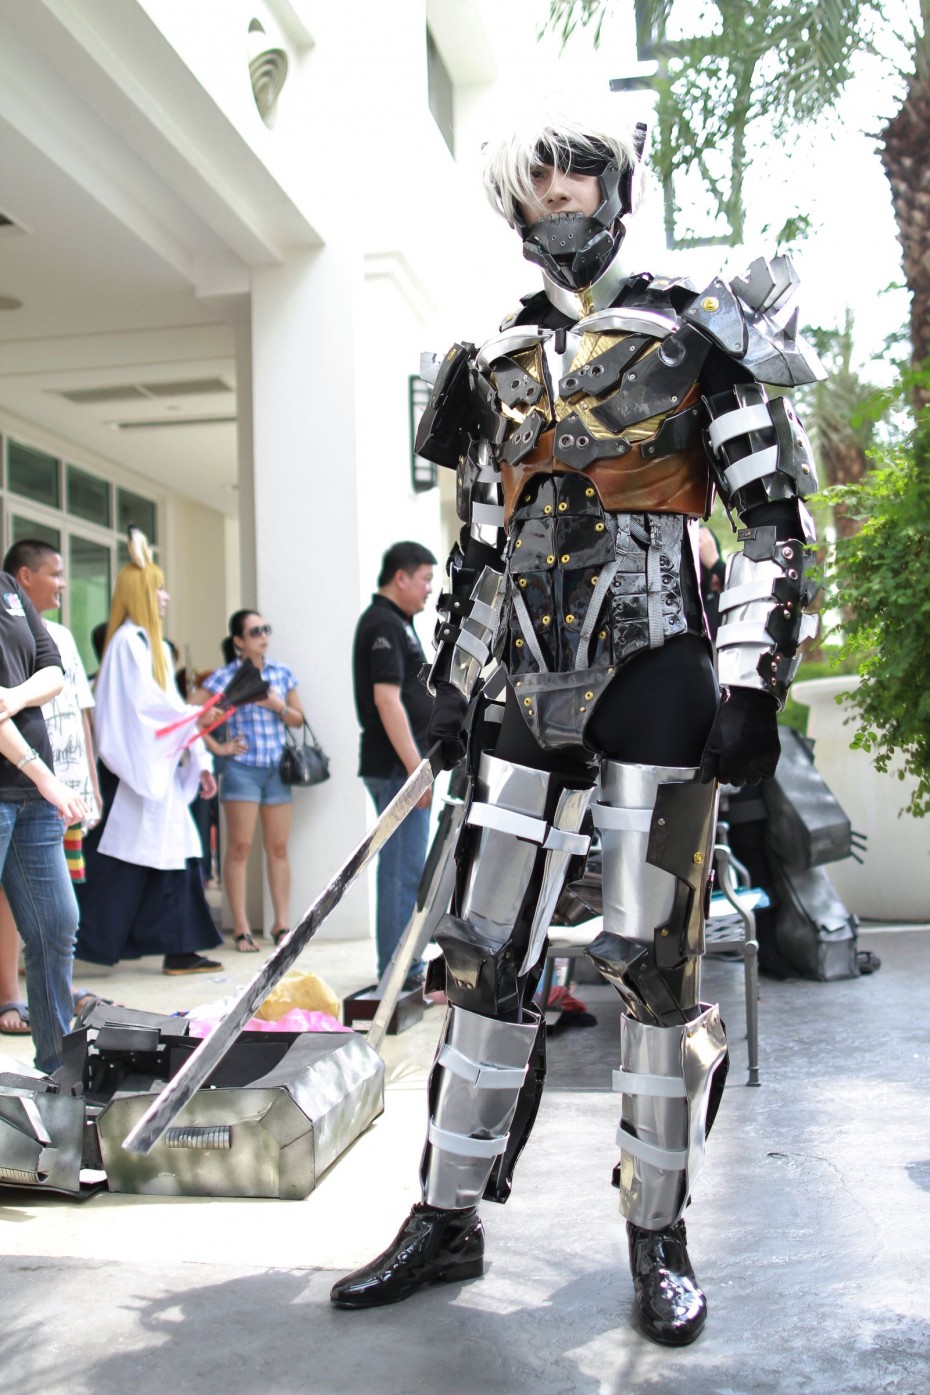 Tan Yee Gim cosplaying as Raiden, a character from Metal Gear Rising. Photo credit to Dioz Teoh. 